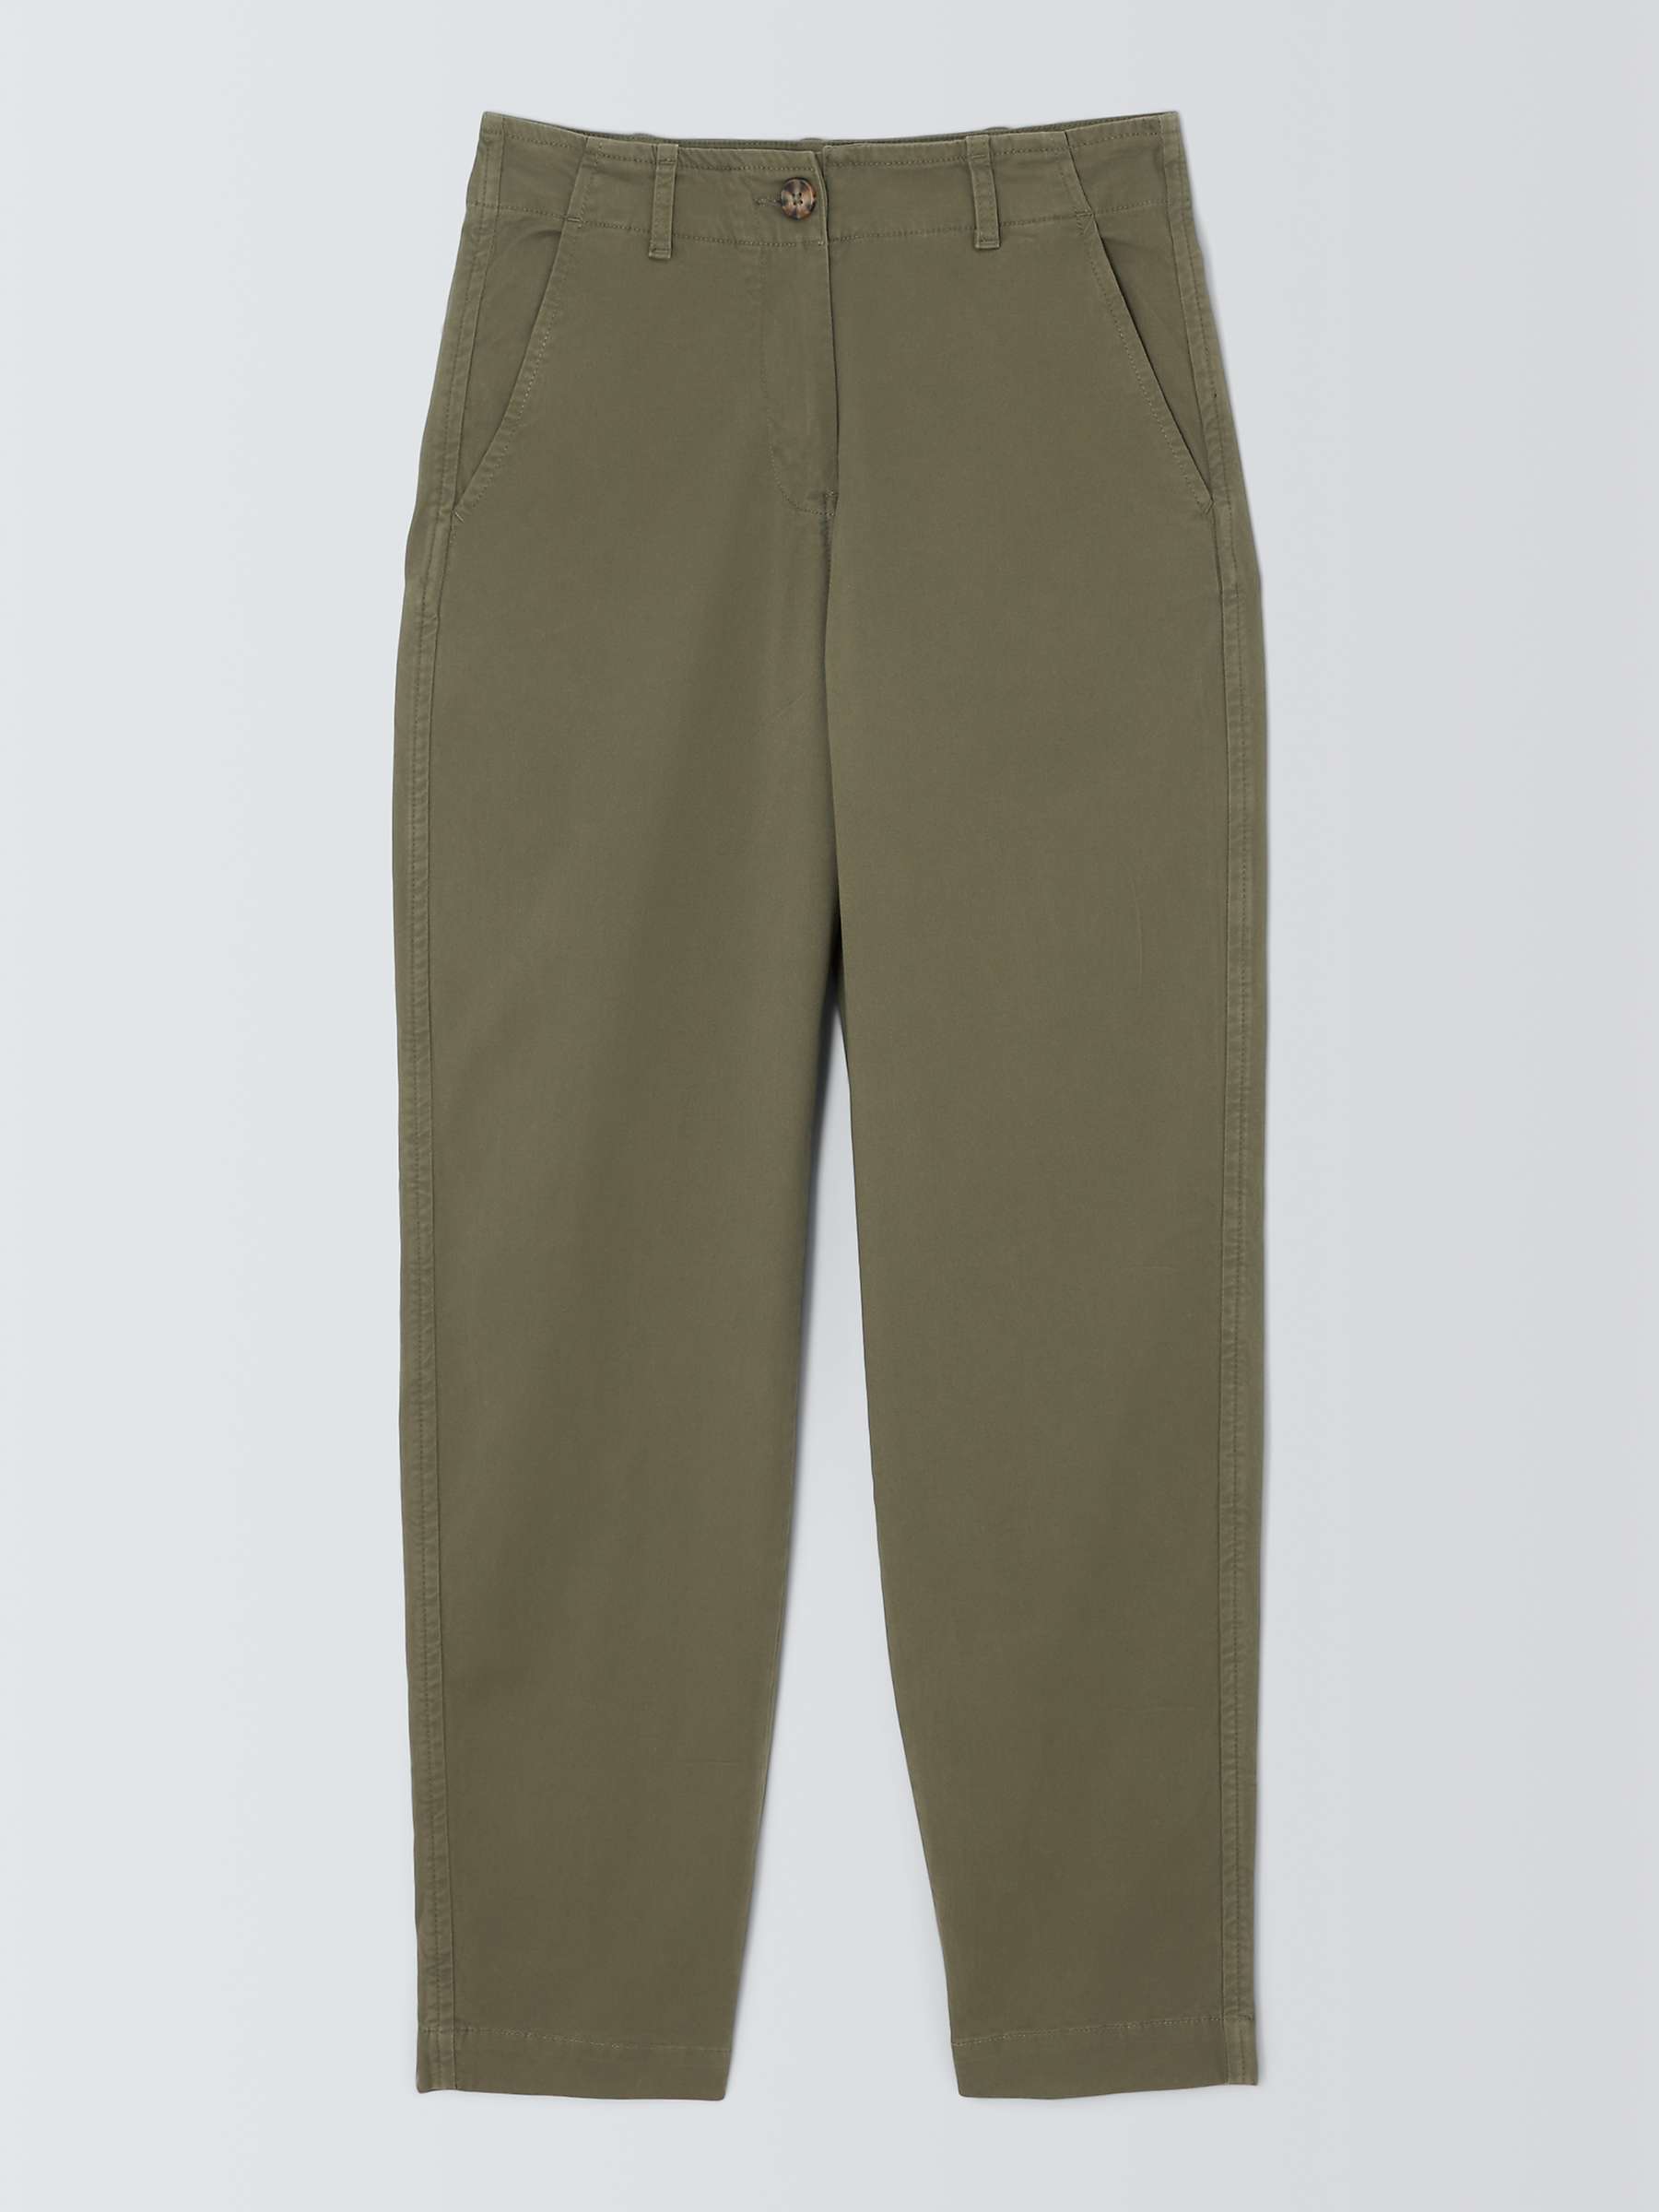 Buy John Lewis Tapered Cotton Blend Chino Trousers Online at johnlewis.com